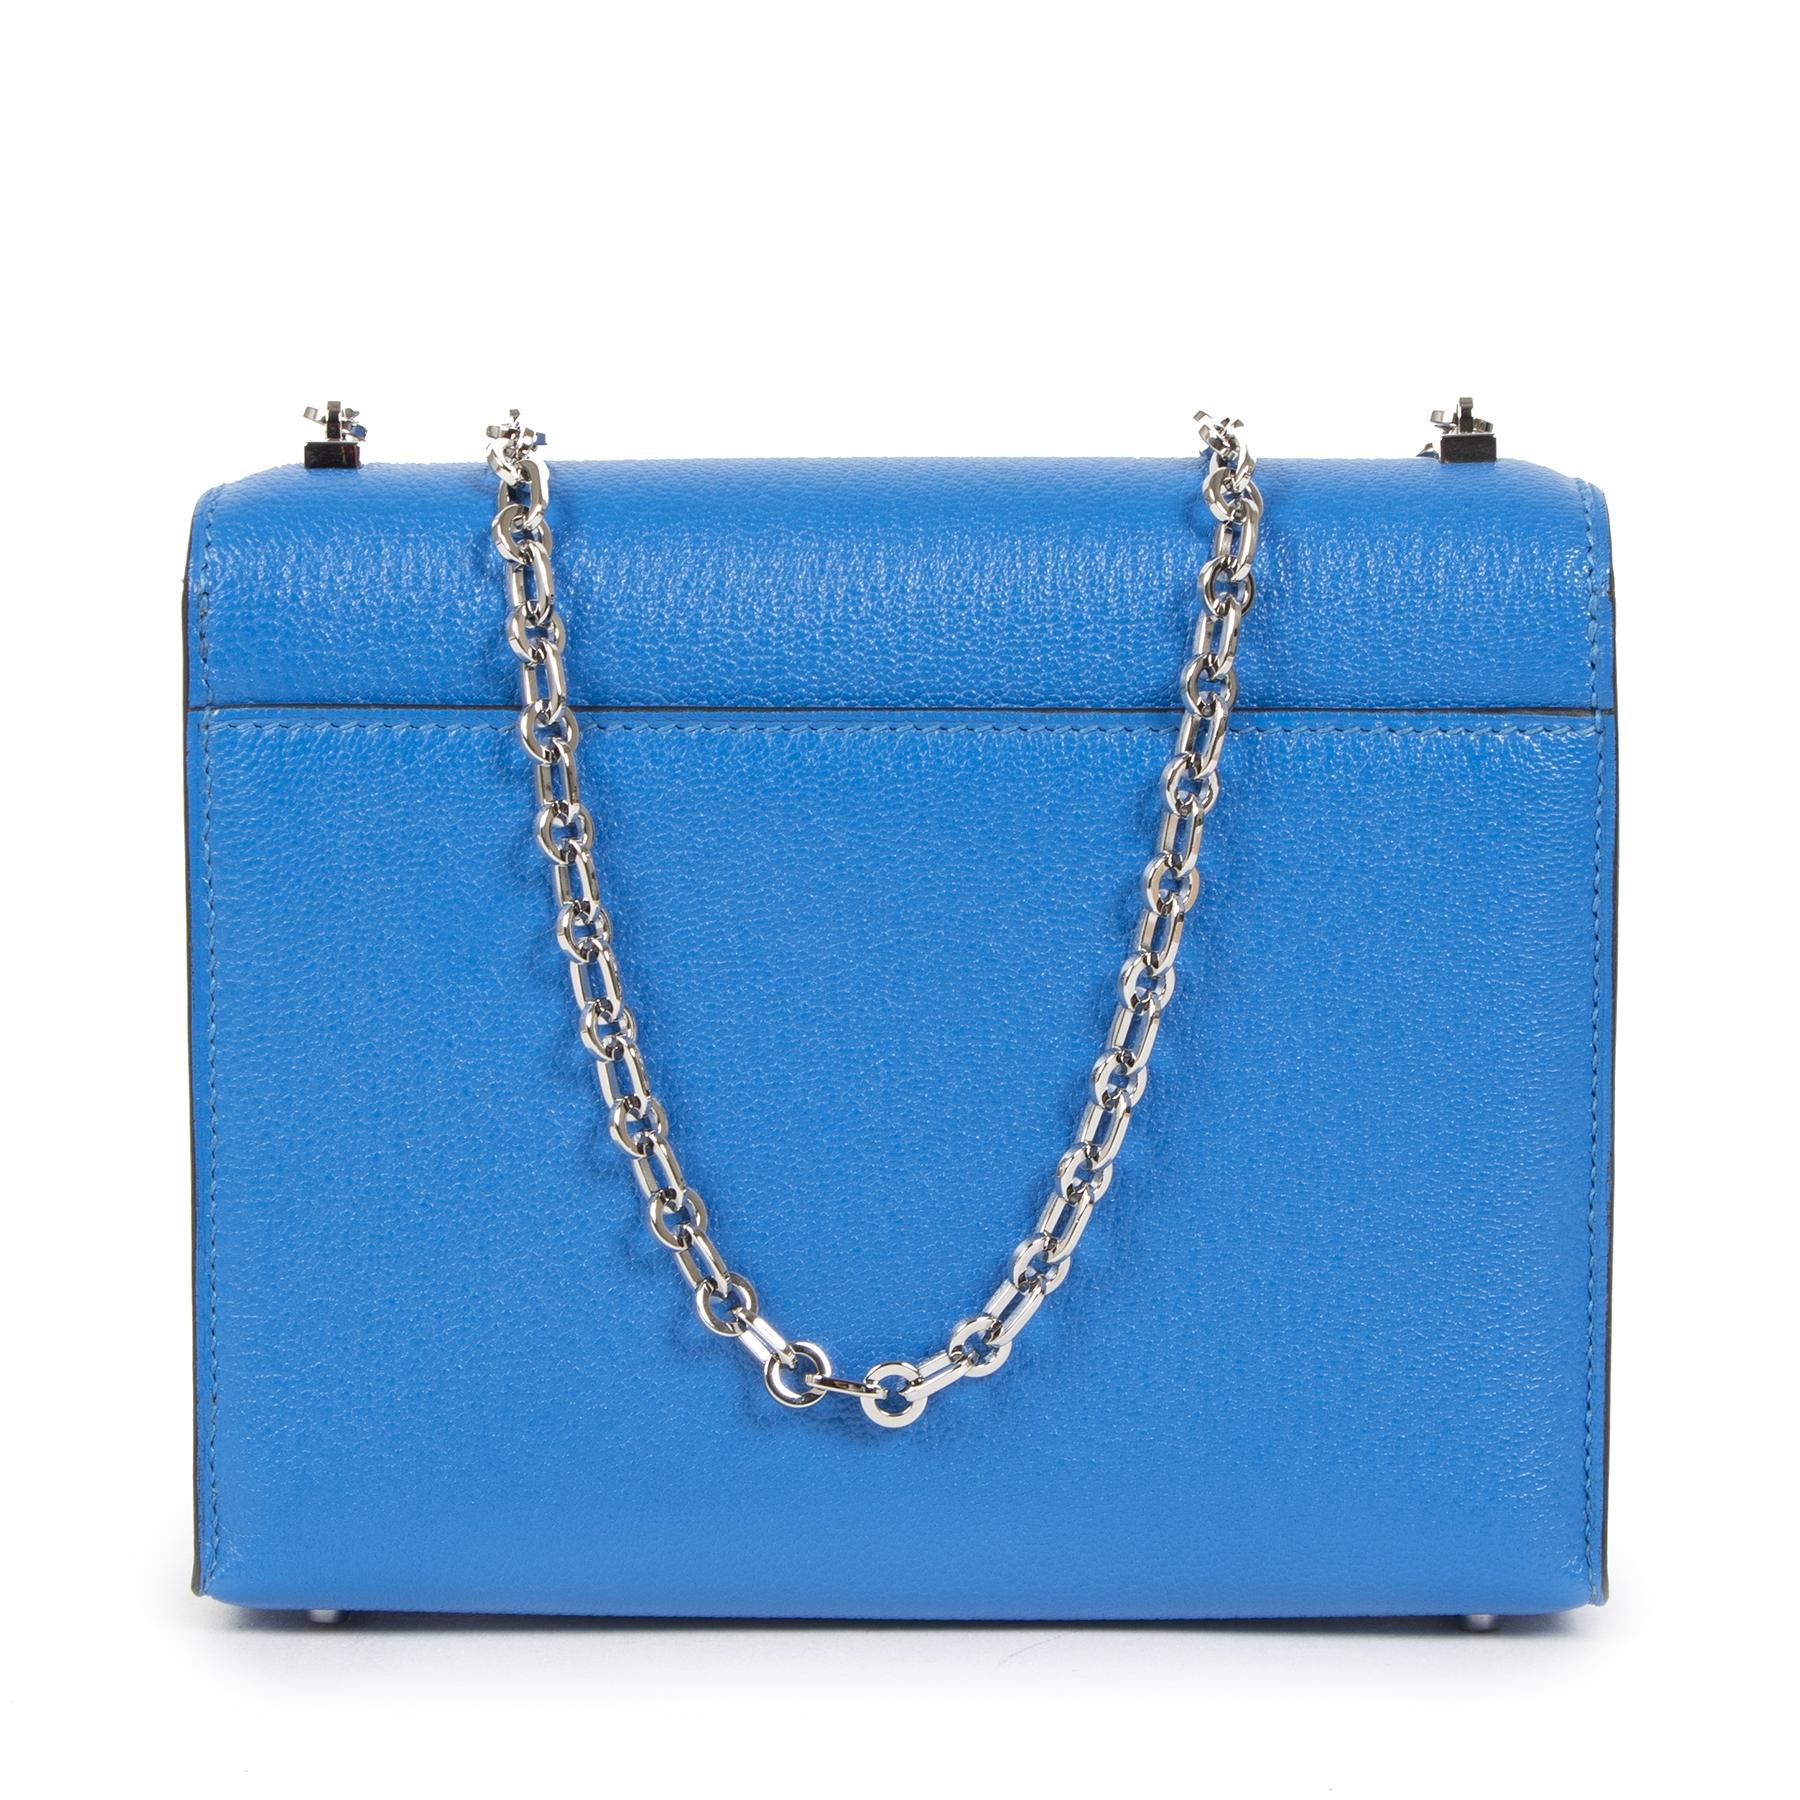 Brand new never worn

Hermès Sac Verrou Chaine Mini Chevre Mysore 17 Bleu Hydra

This gorgeous Verrou Chaine Mini Bag by Hermès is a true beauty, featuring palladium silver-tone hardware and a chain shoulder strap. The bag is finished with a plated